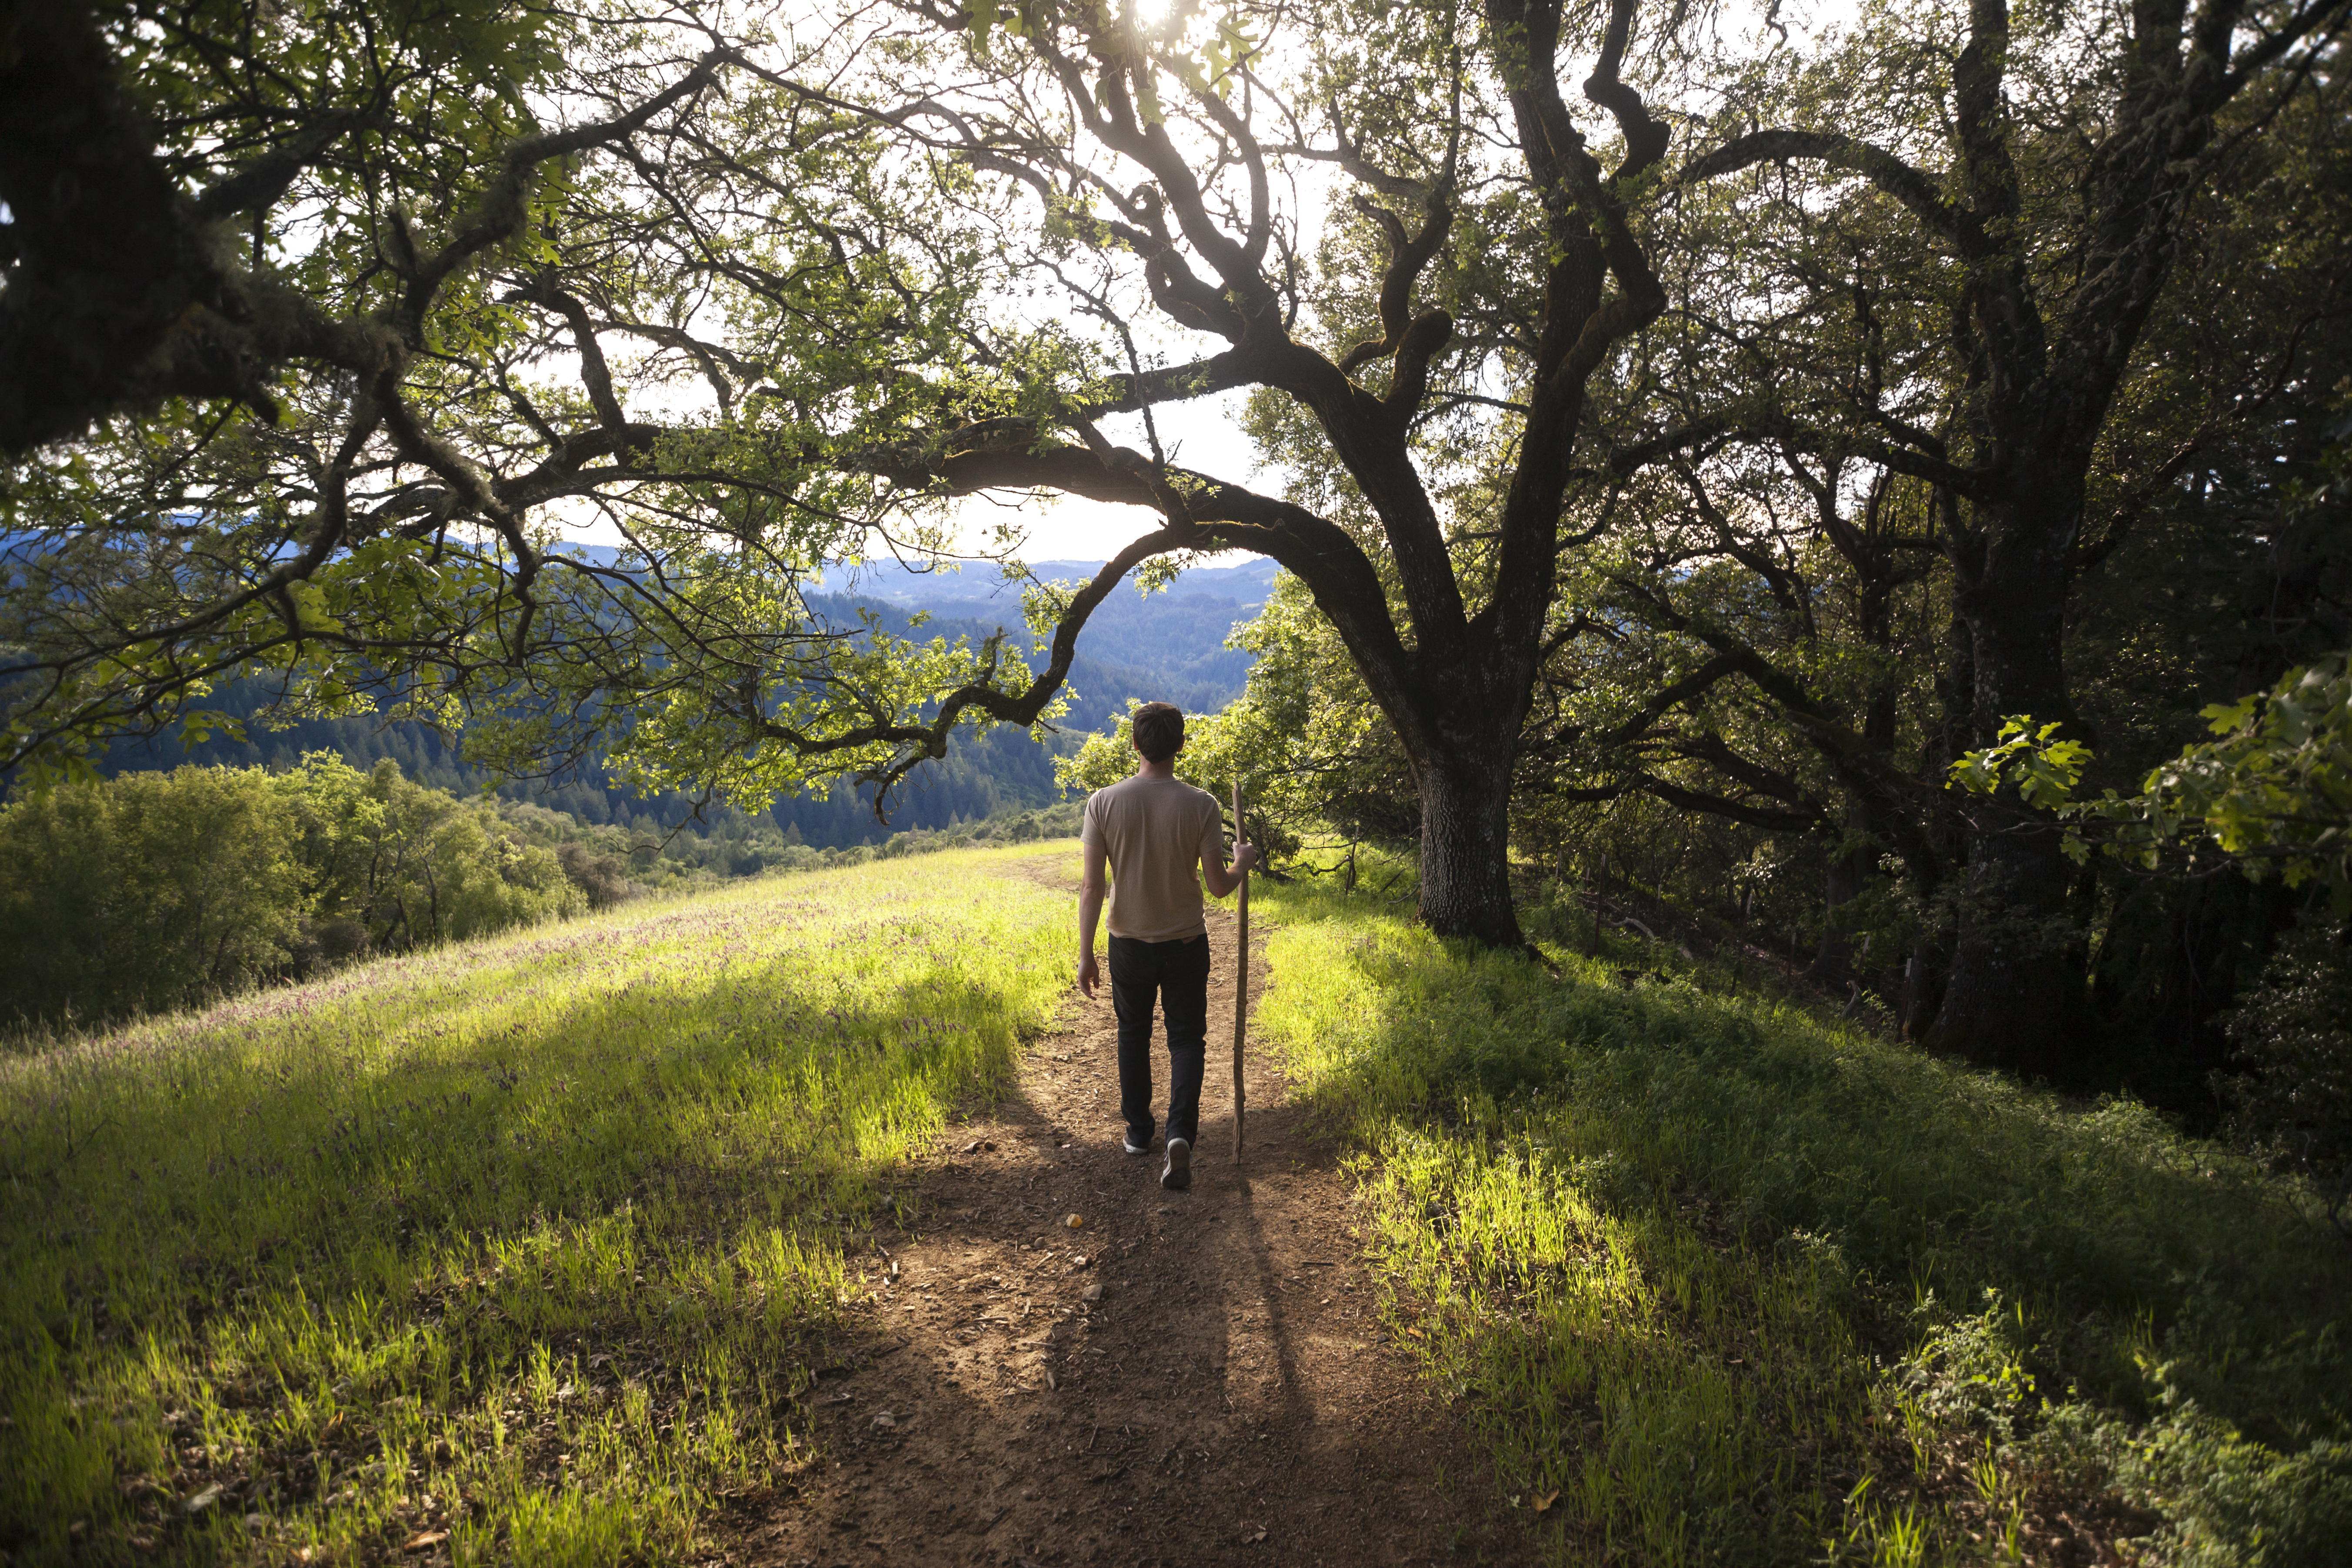 A man walks along an outside trail under a tree while sunlight streams down from the sky.